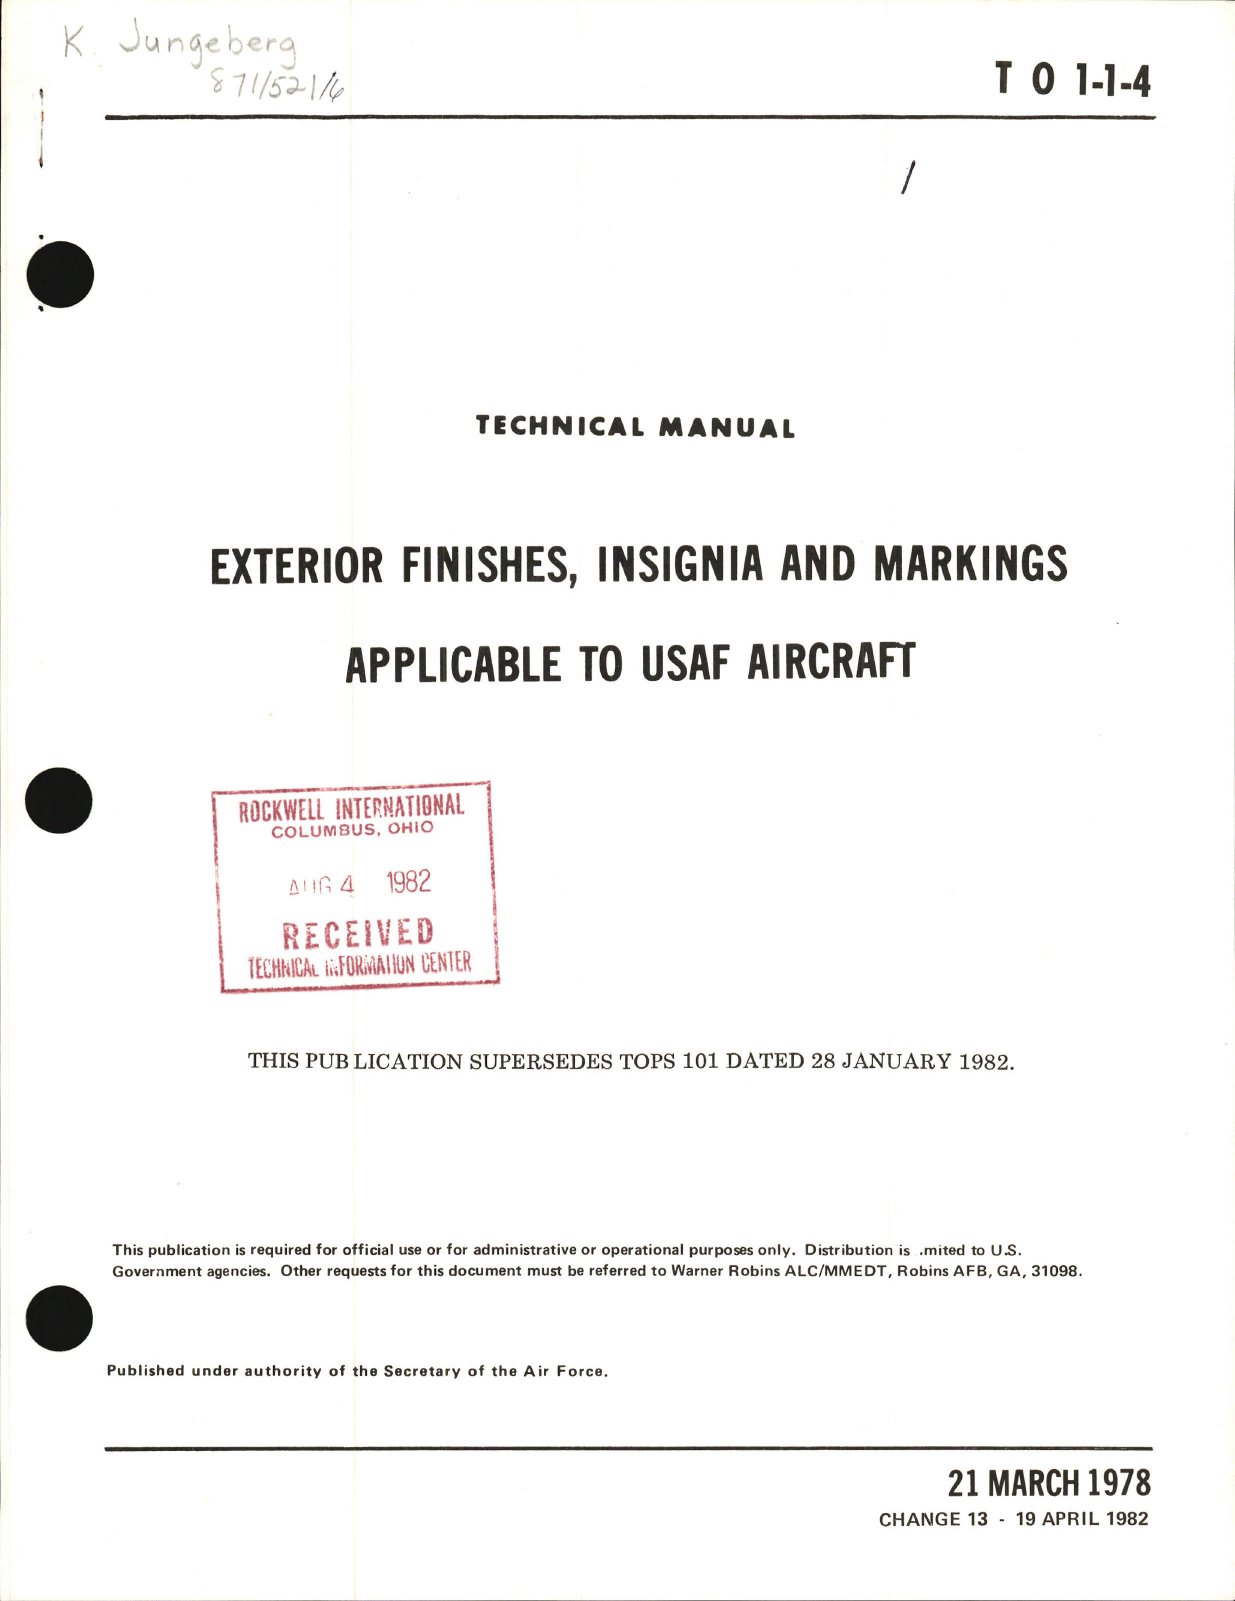 Sample page 1 from AirCorps Library document: Exterior Finishes, Insignia and Markings for USAF Aircraft - Change - 13